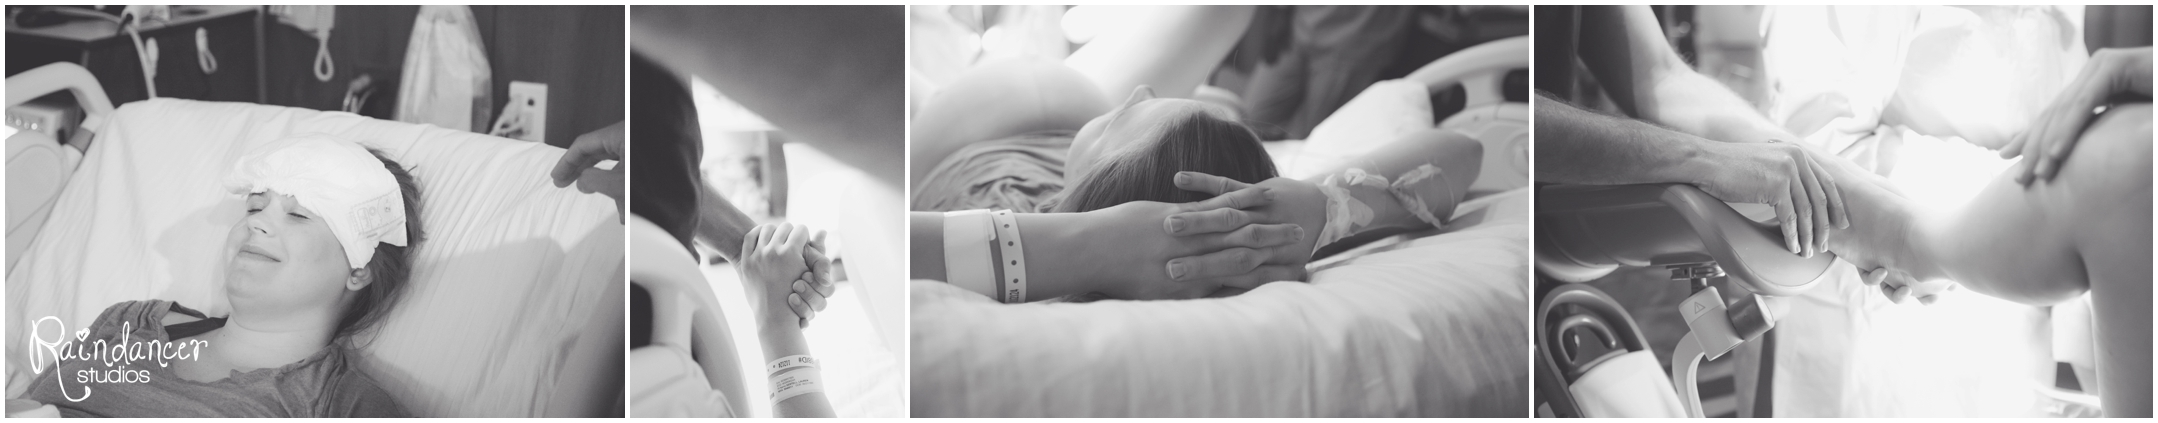 Indianapolis birth photography, Indy birth photographer, Indianapolis birth photographer, birth photography